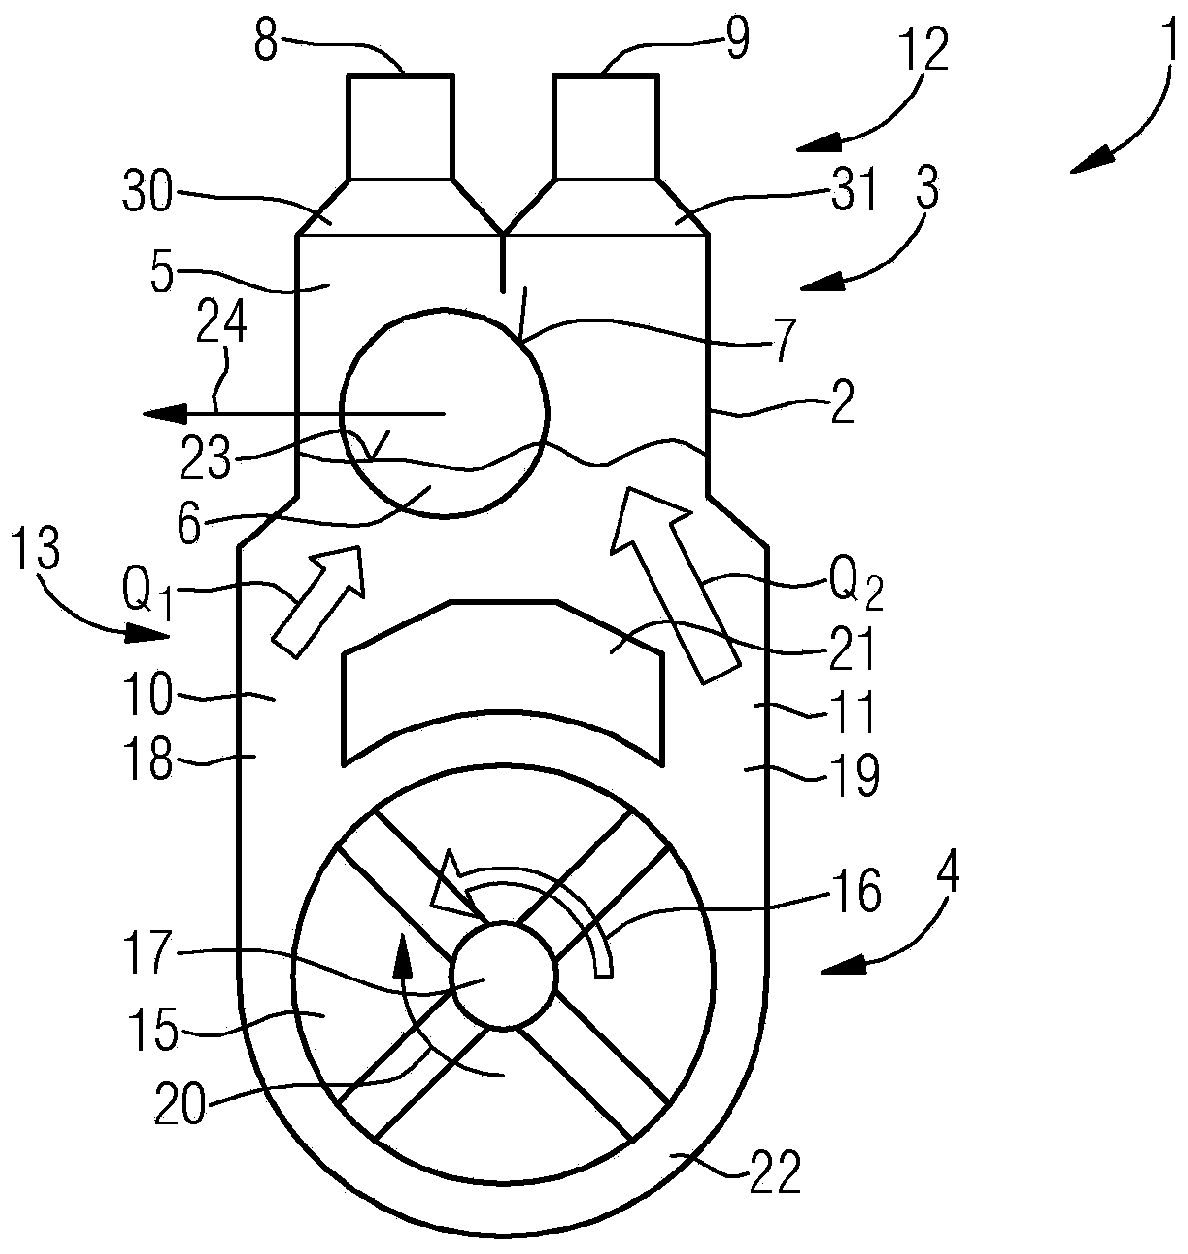 Change-over valve assemblies for water-conducting household appliances and water-conducting household appliances